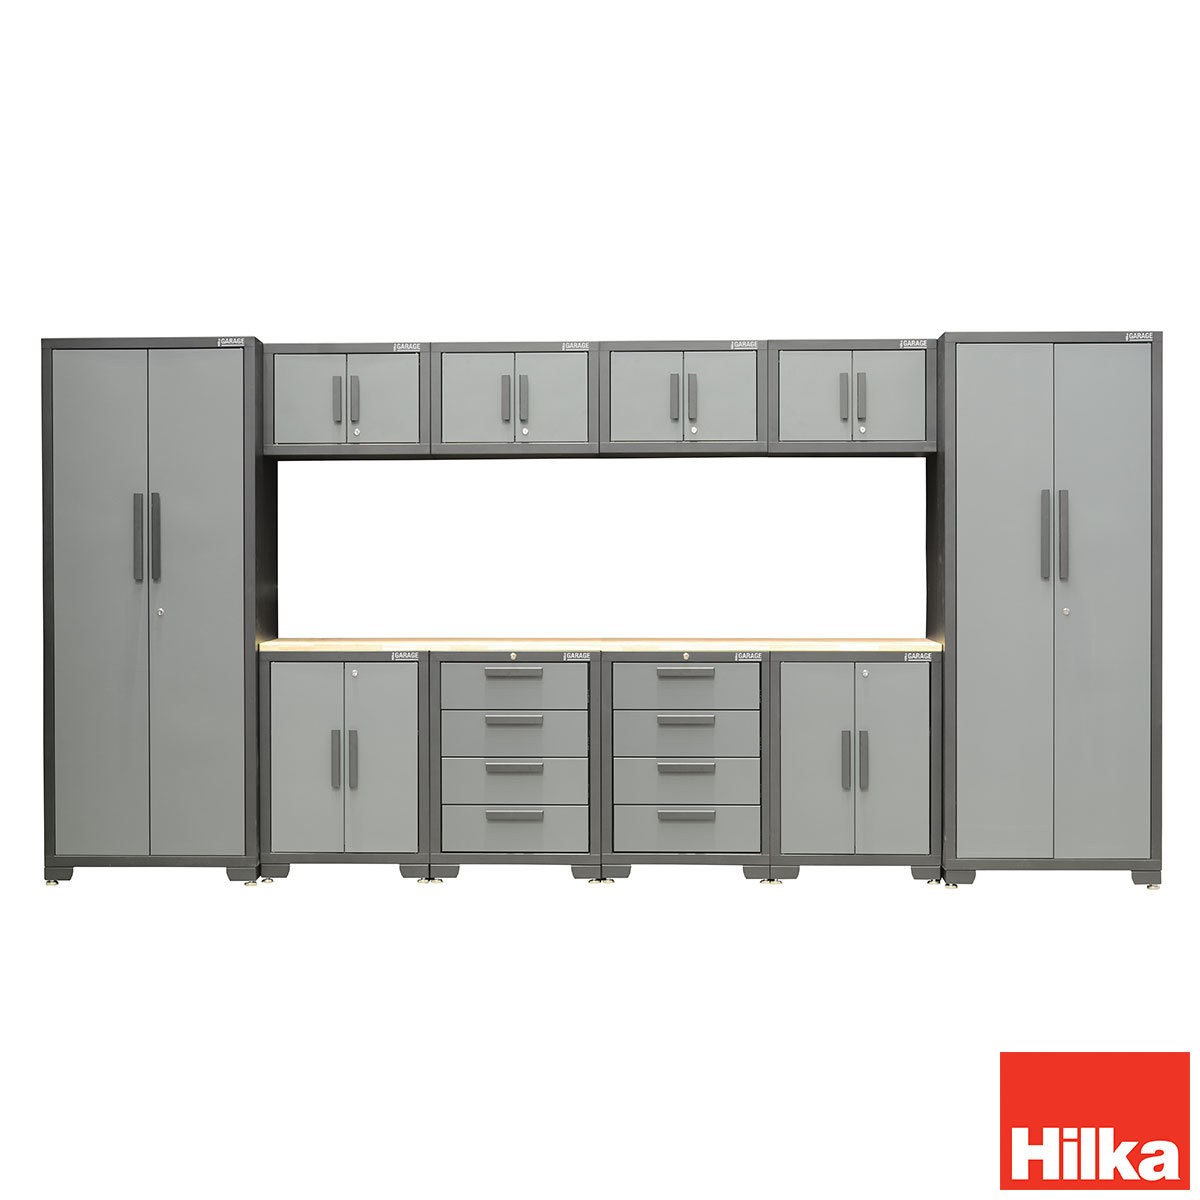 Front facing image of Hilka 11 piece storage on white background